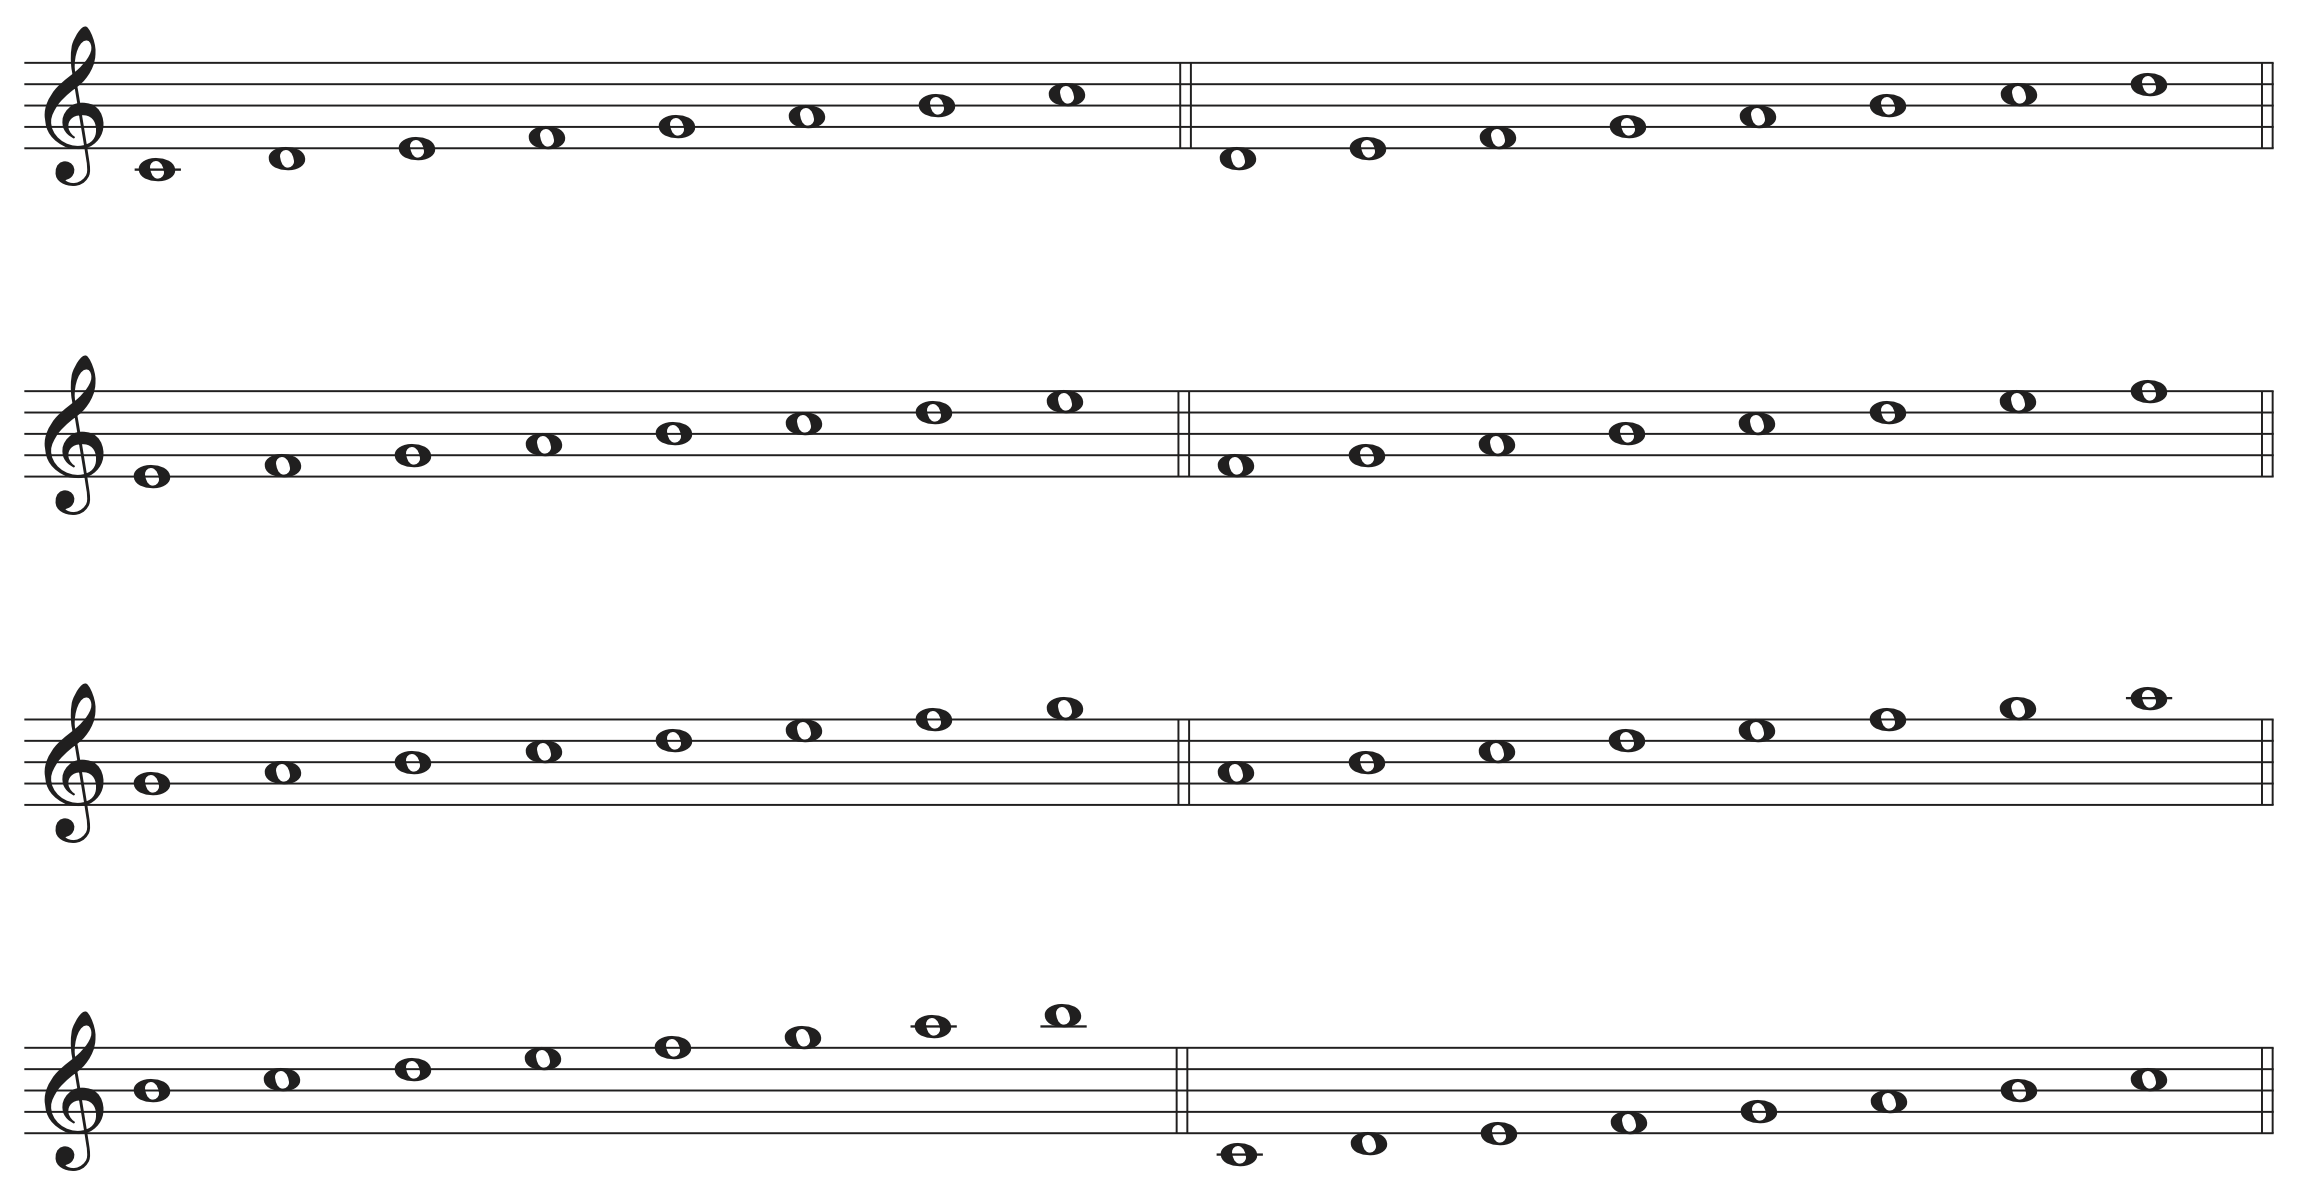 Eight modal scales drawn using the notes C, D, E, F, G, A, B with each scale drawn starting on the next consecutive pitch.